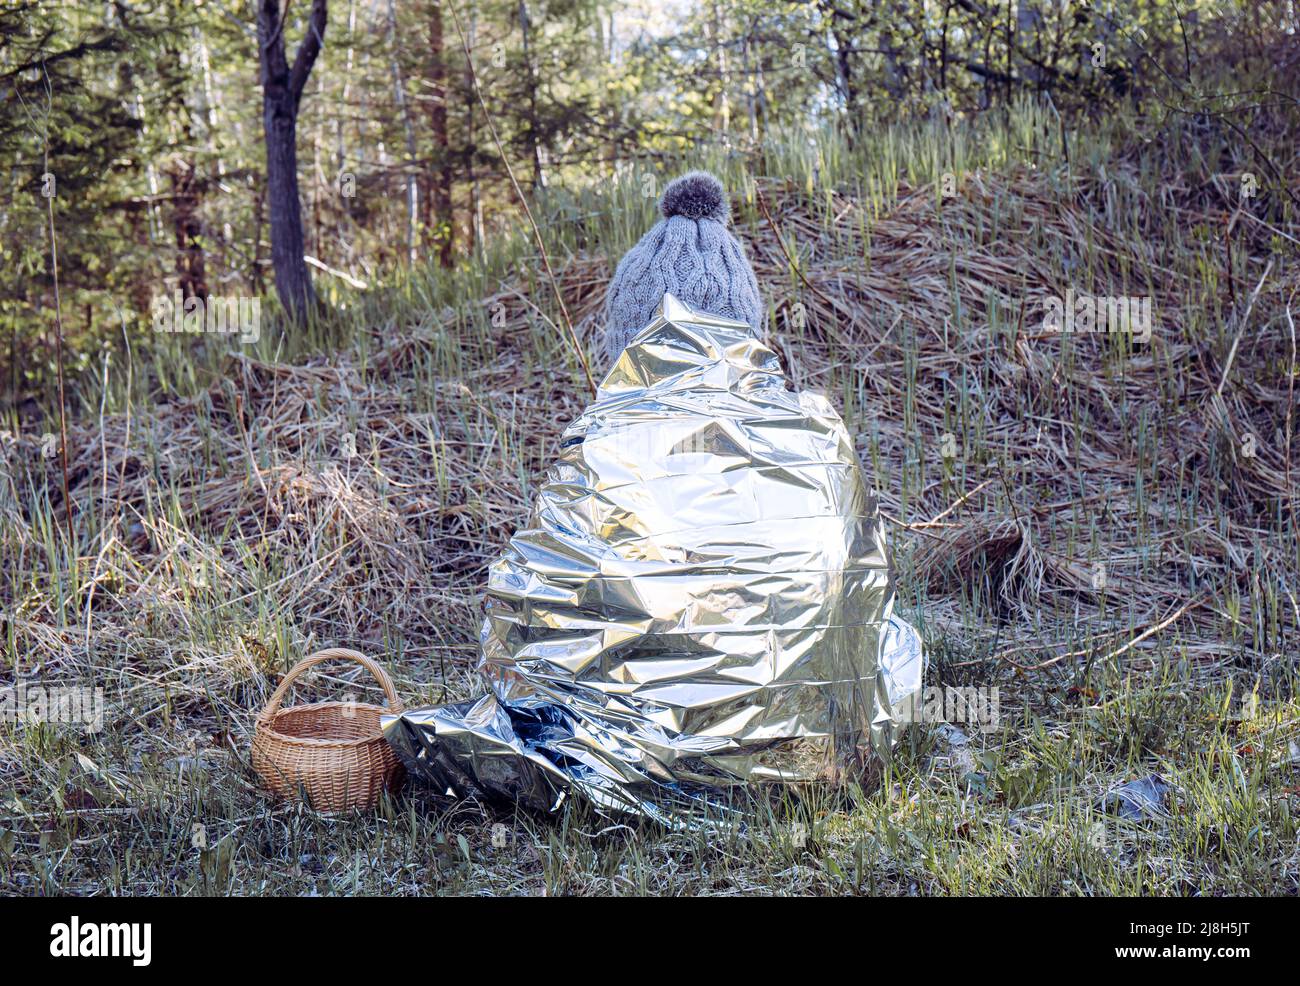 Woman person is lost and sit in wild forest in cold day, using first aid emergency blanket to prevent hypothermia and body heat loss. Stock Photo